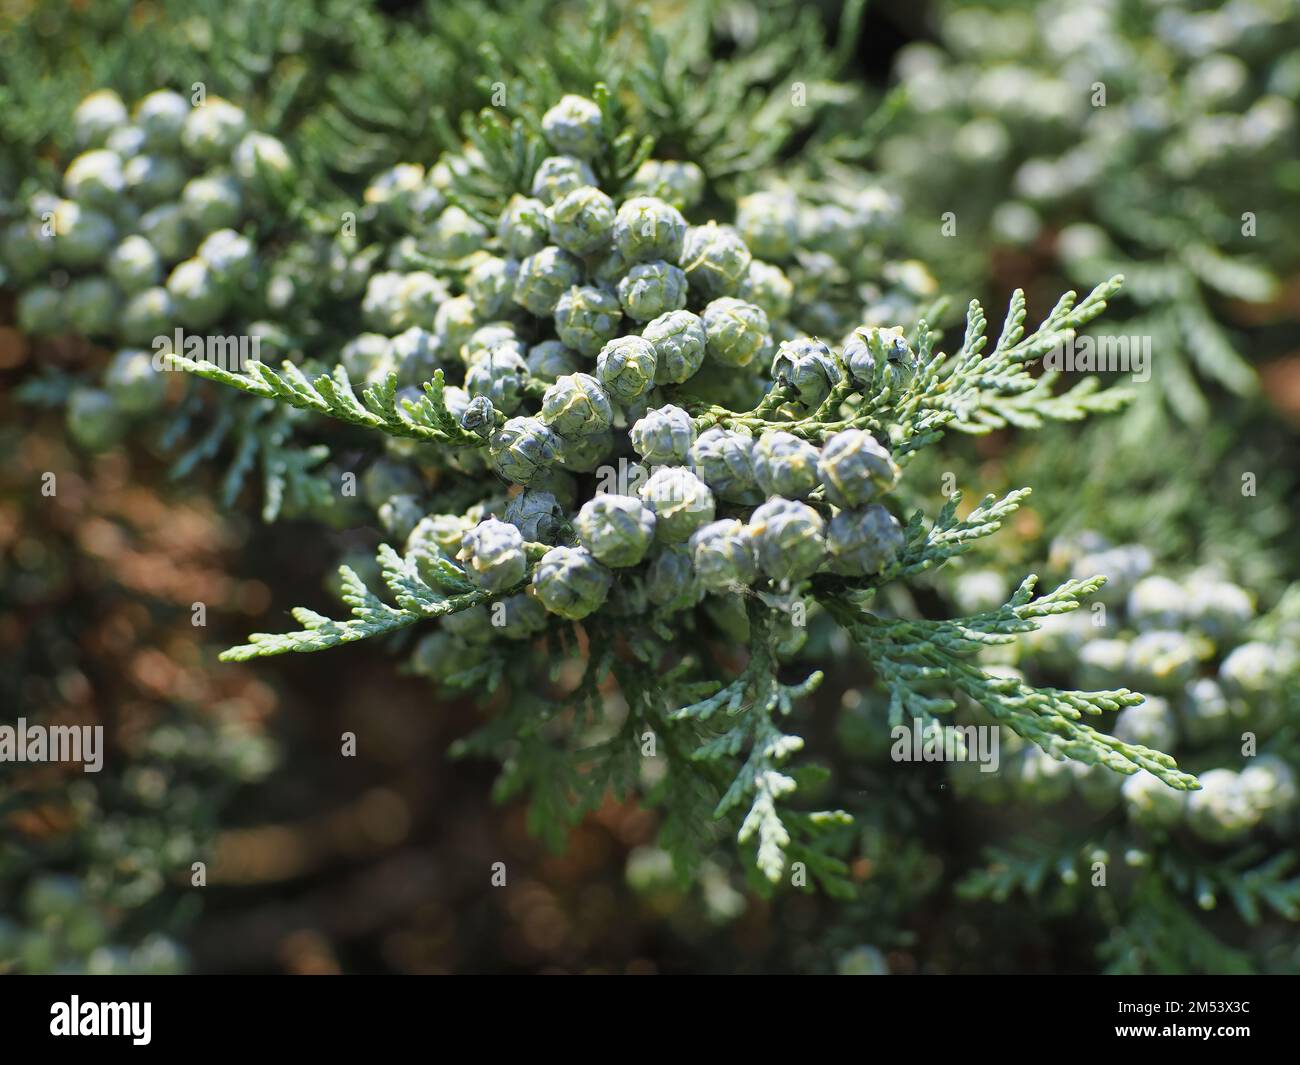 Ripe berries on a Lawson cypress branch Stock Photo